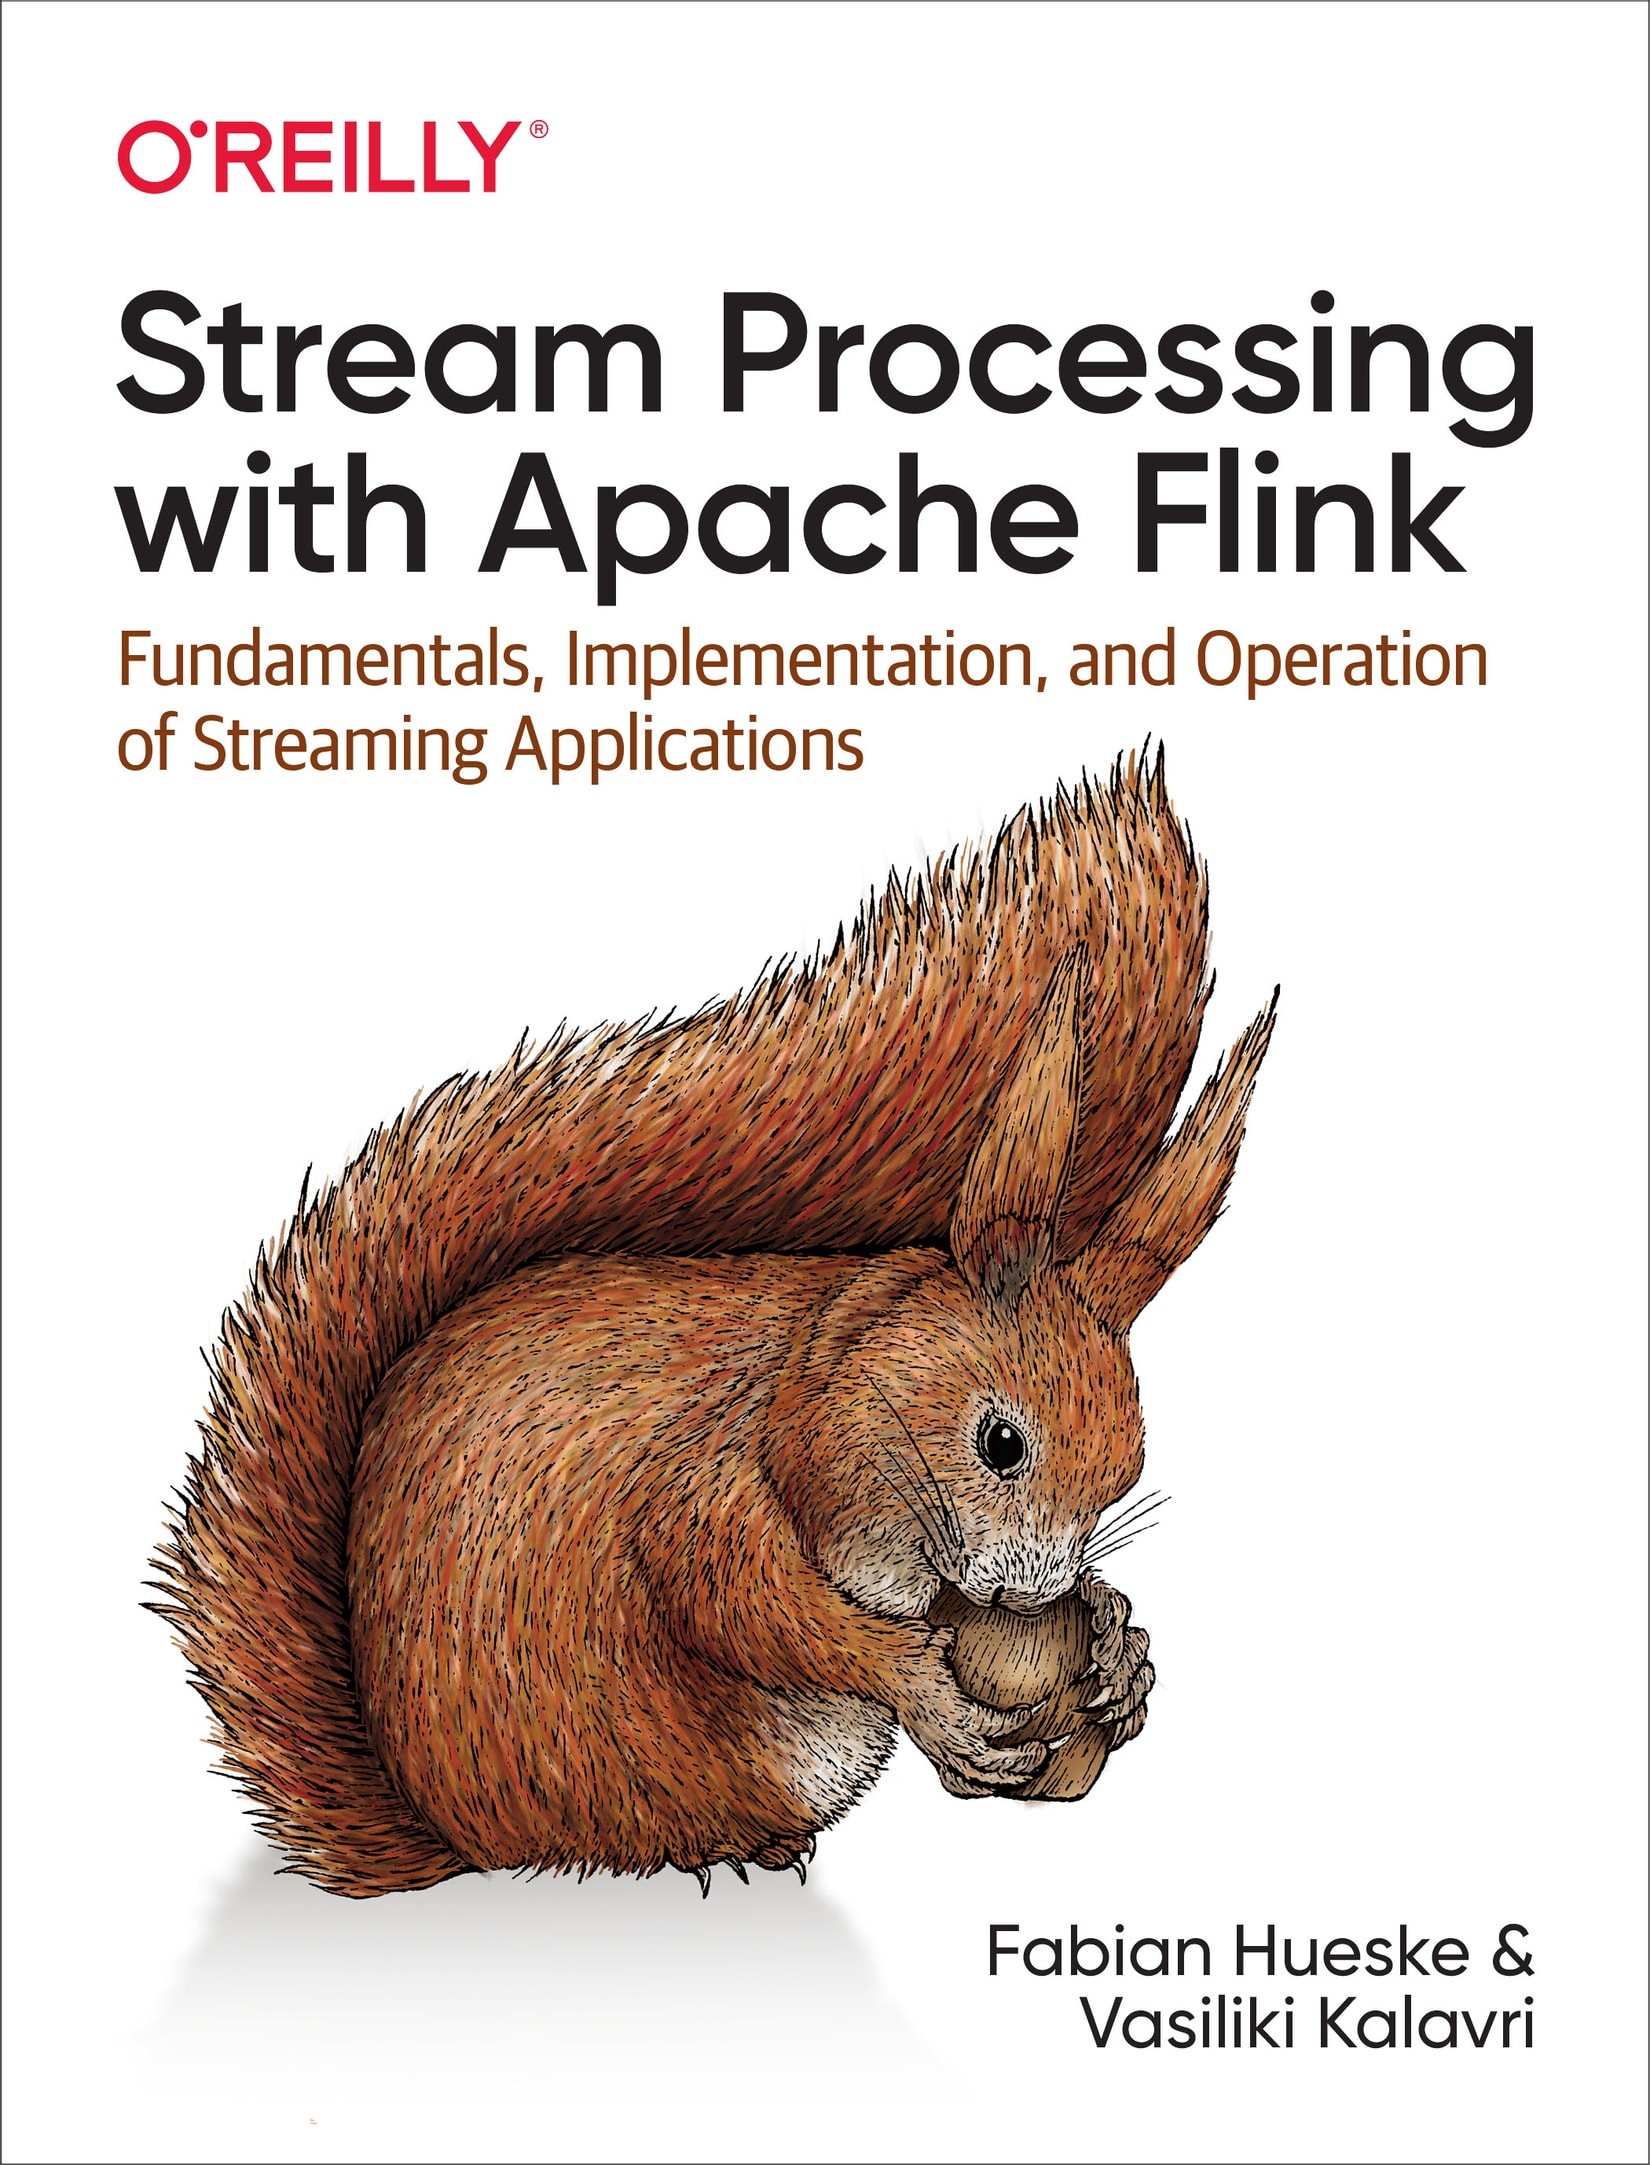 Stream Processing With Apache Flink: Fundamentals, Implementation, and Operation of Streaming Applications